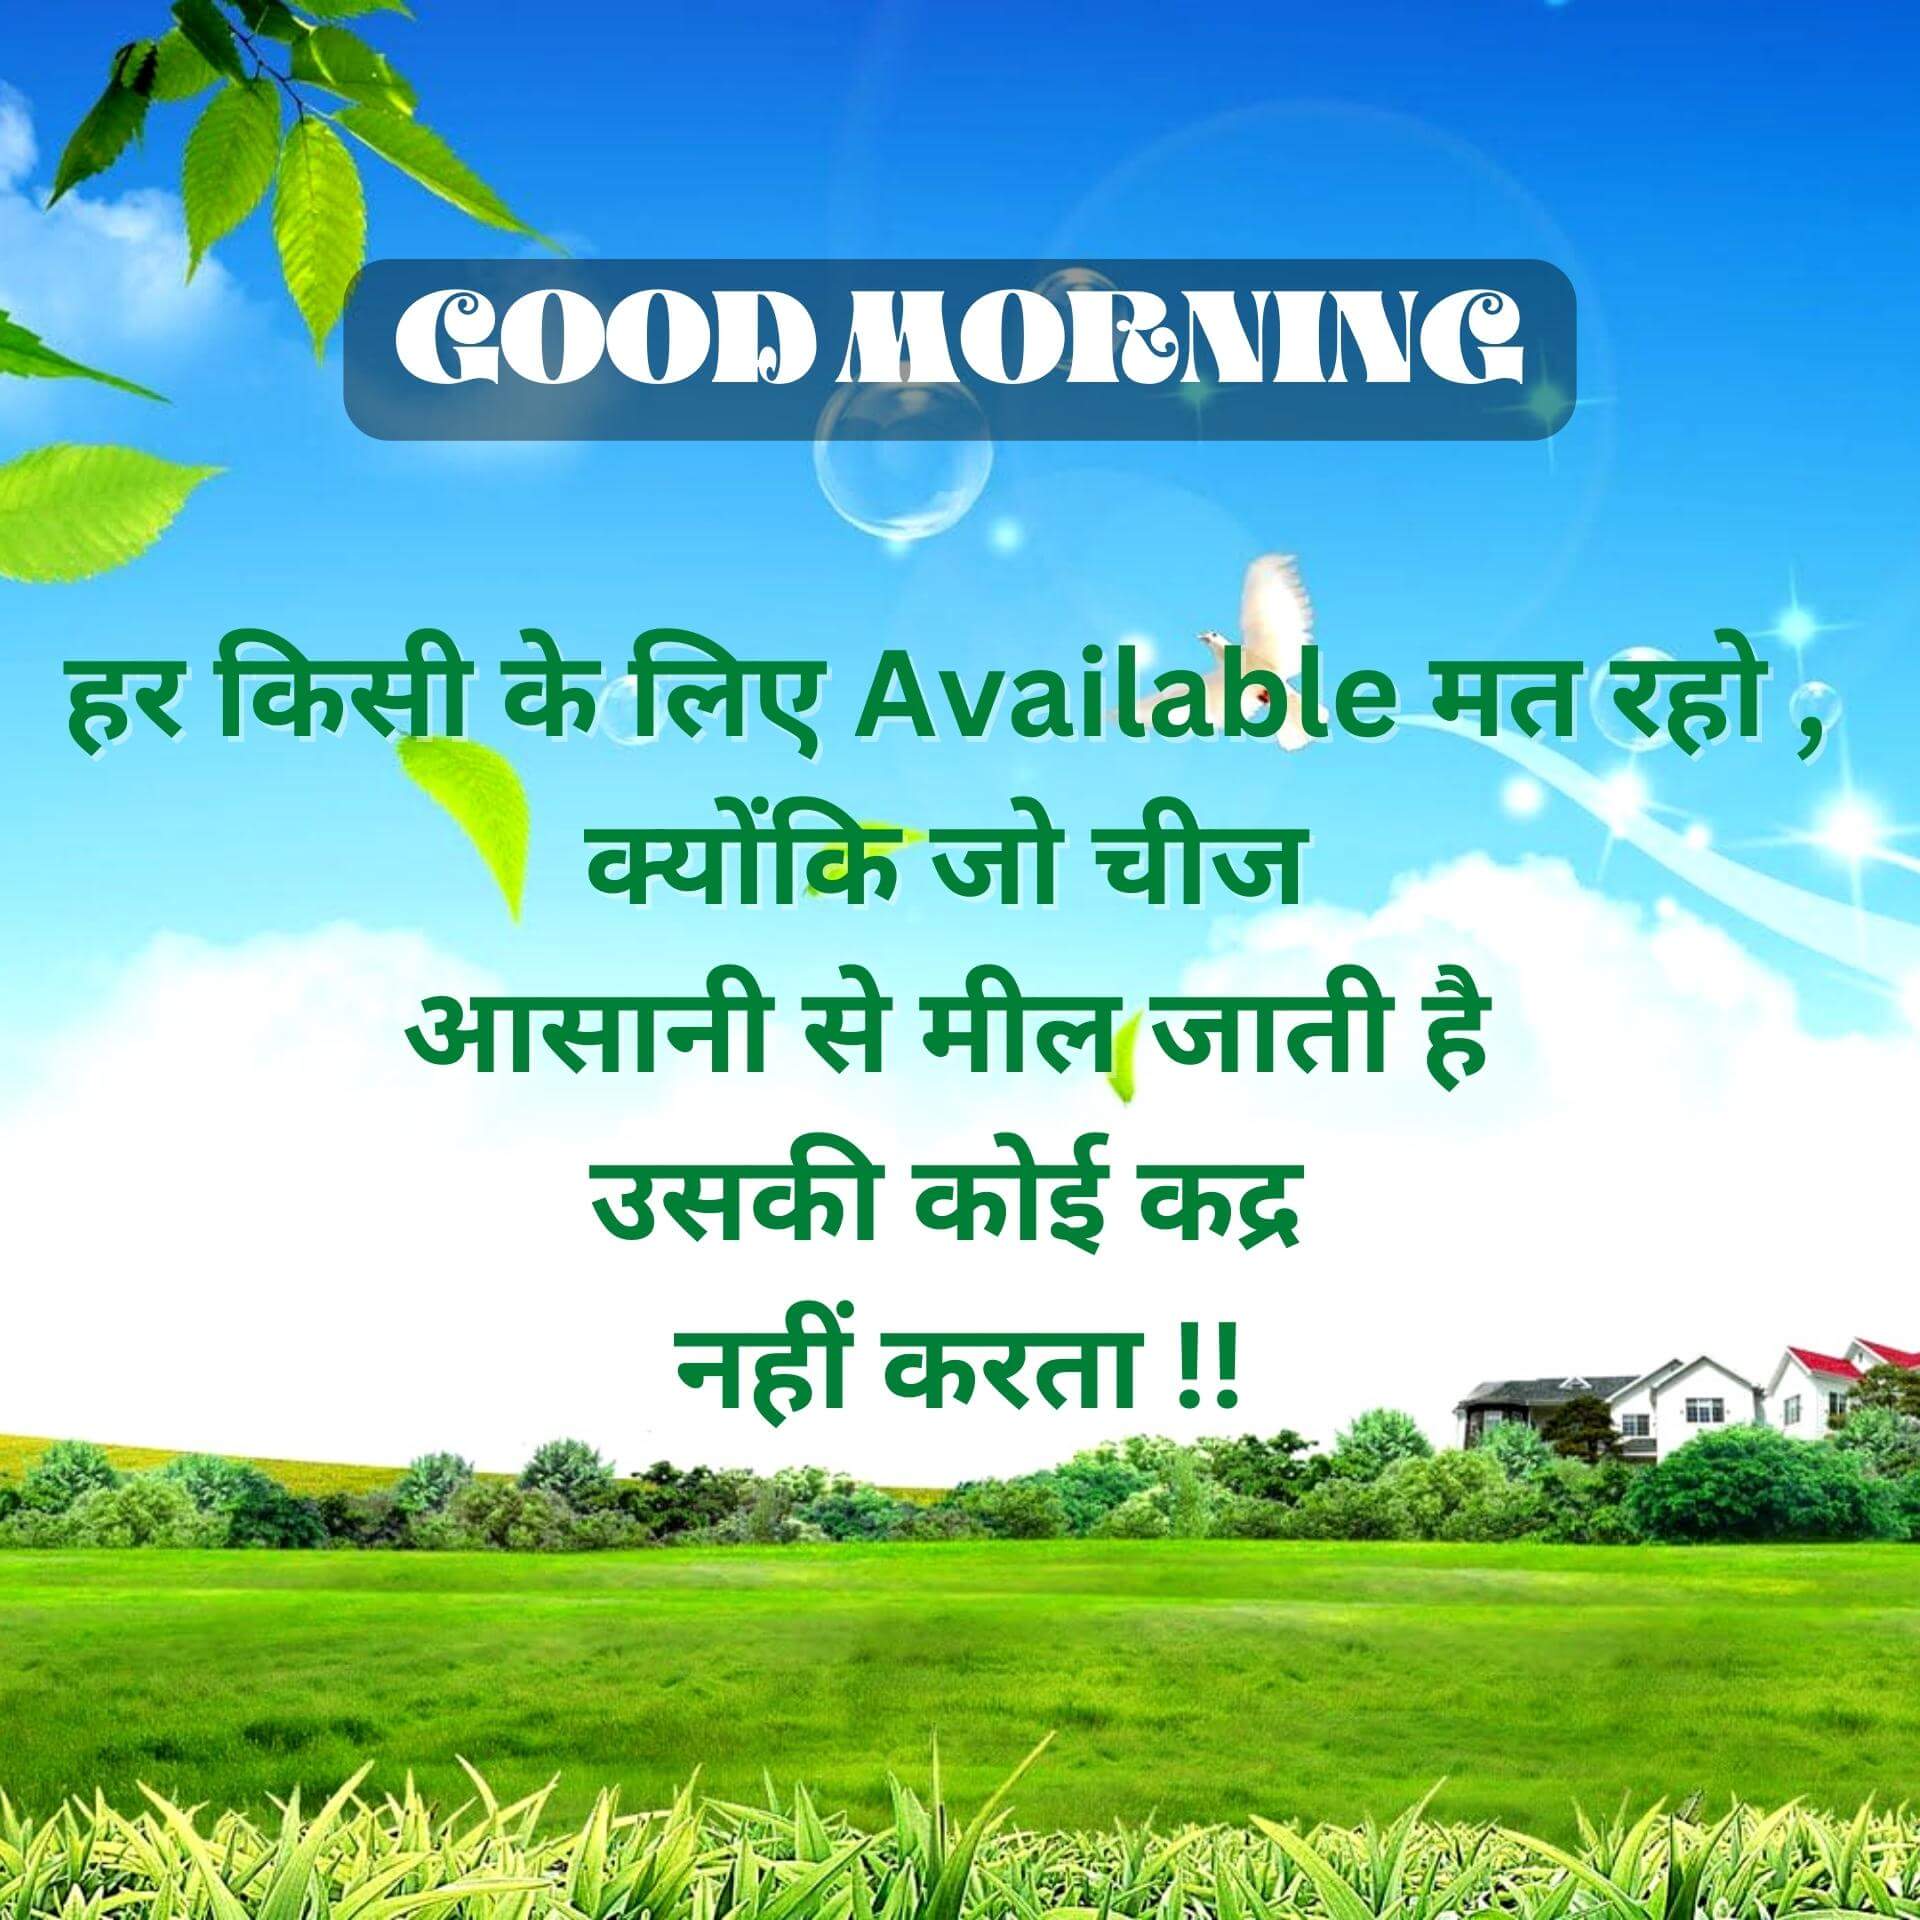 Good Morning Images With Hindi Quotes Pics Wallpaper for Facebook